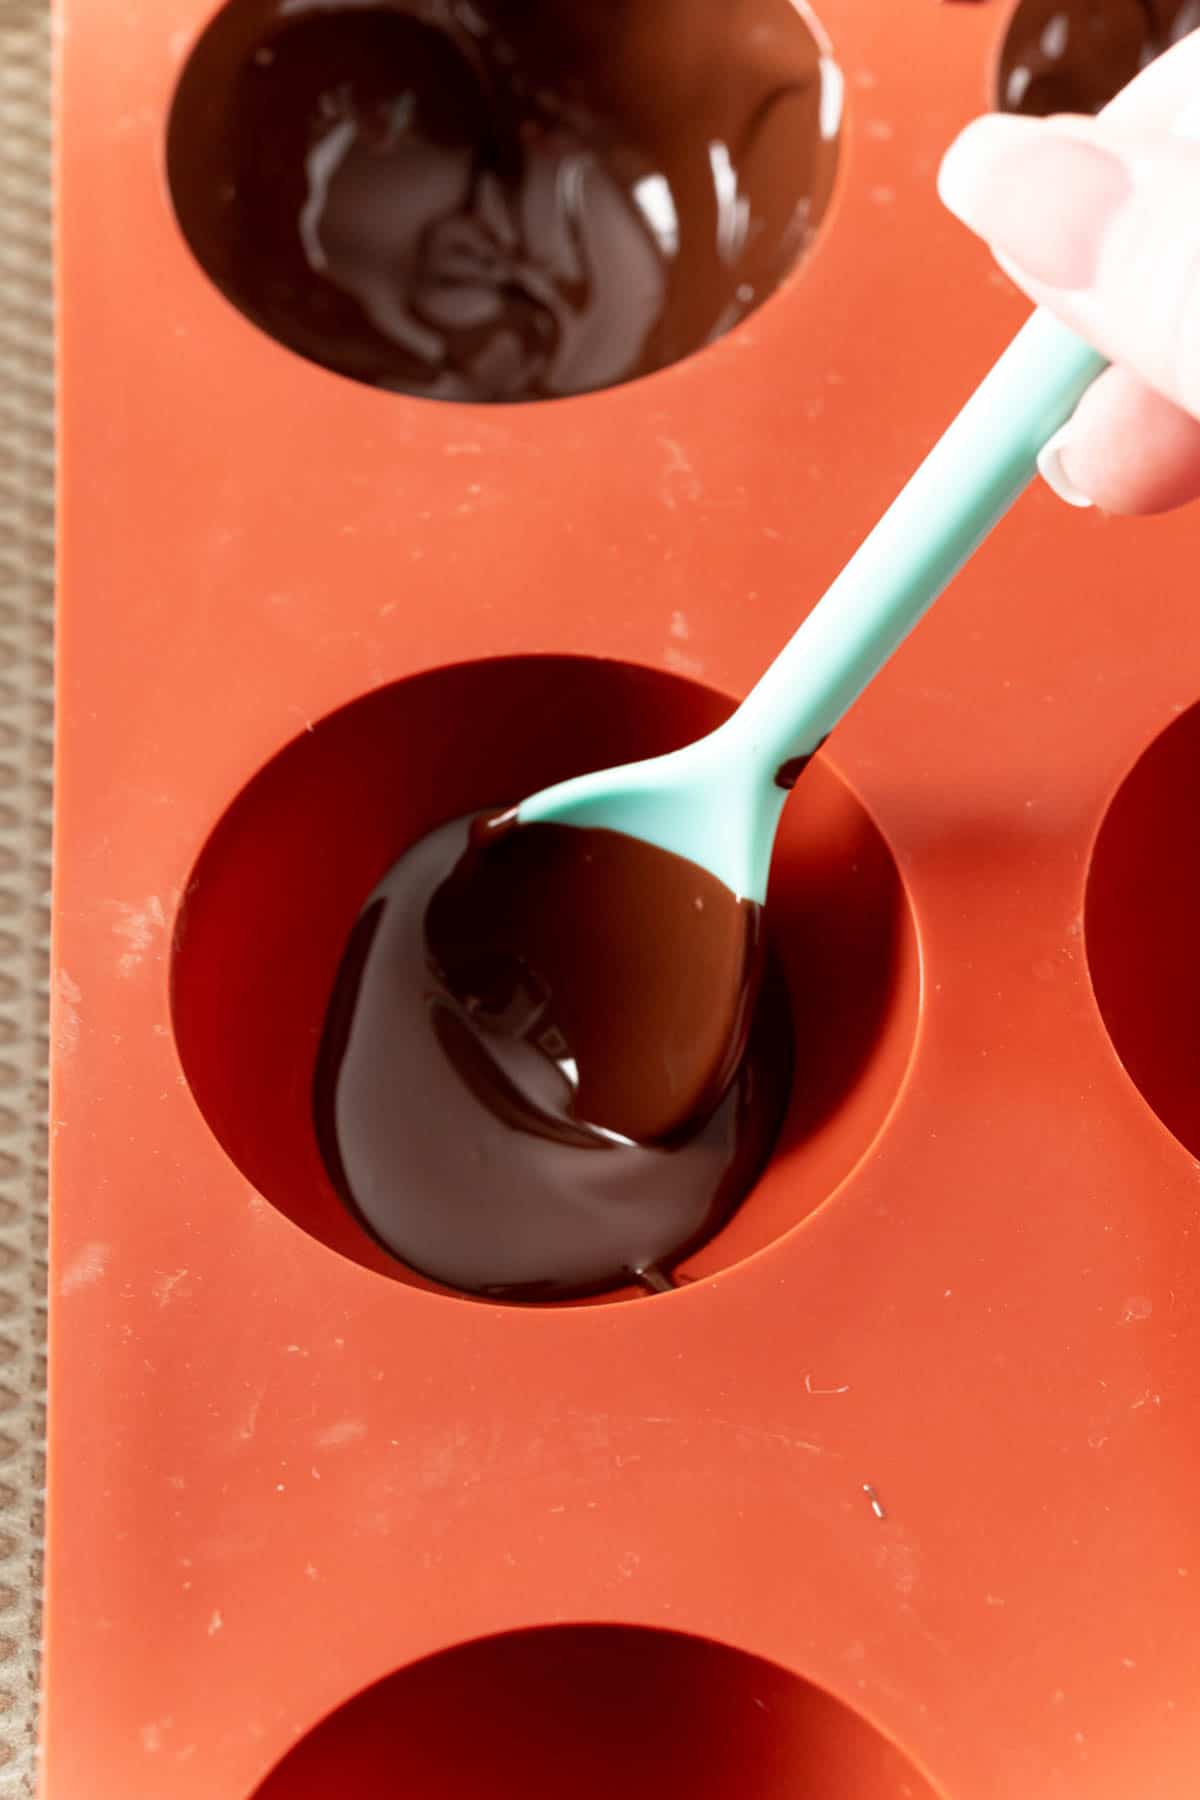 Spoon of chocolate being put into silicone molds